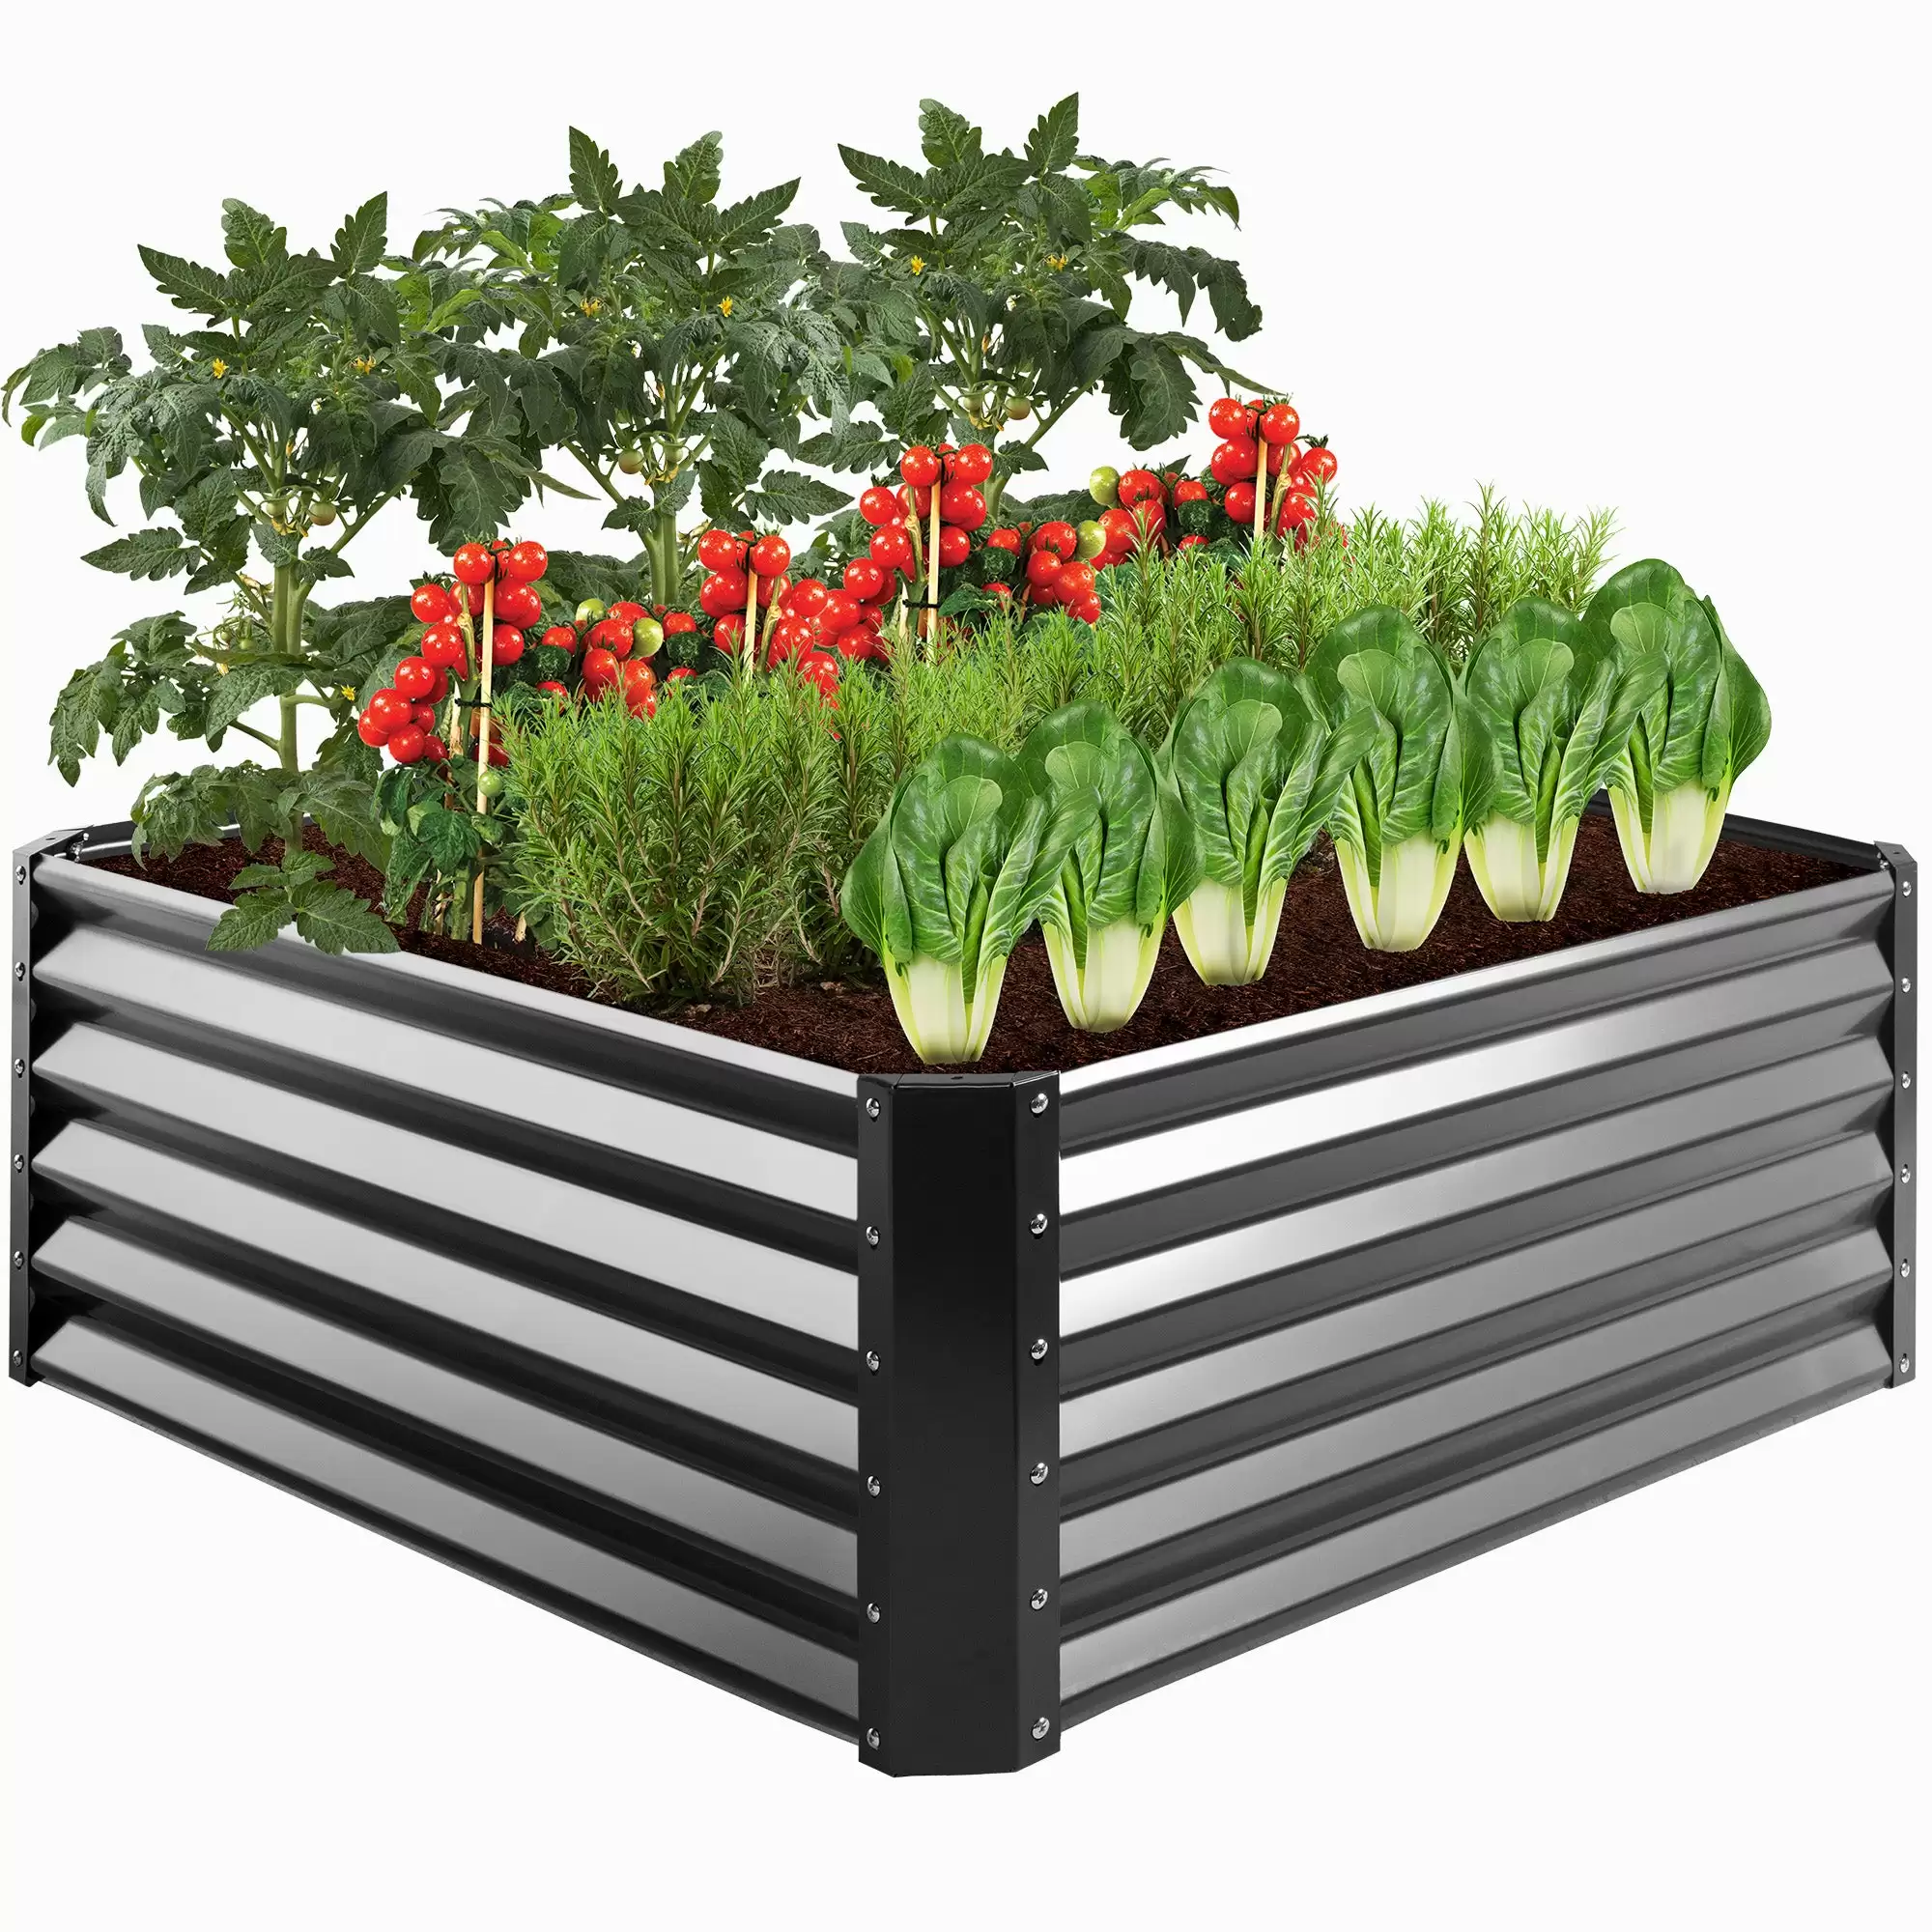 Order In Just $63.99 Outdoor Metal Raised Garden Bed For Vegetables, Flowers, Herbs - 4x4x1.5ft With This Bestchoiceproducts Discount Voucher